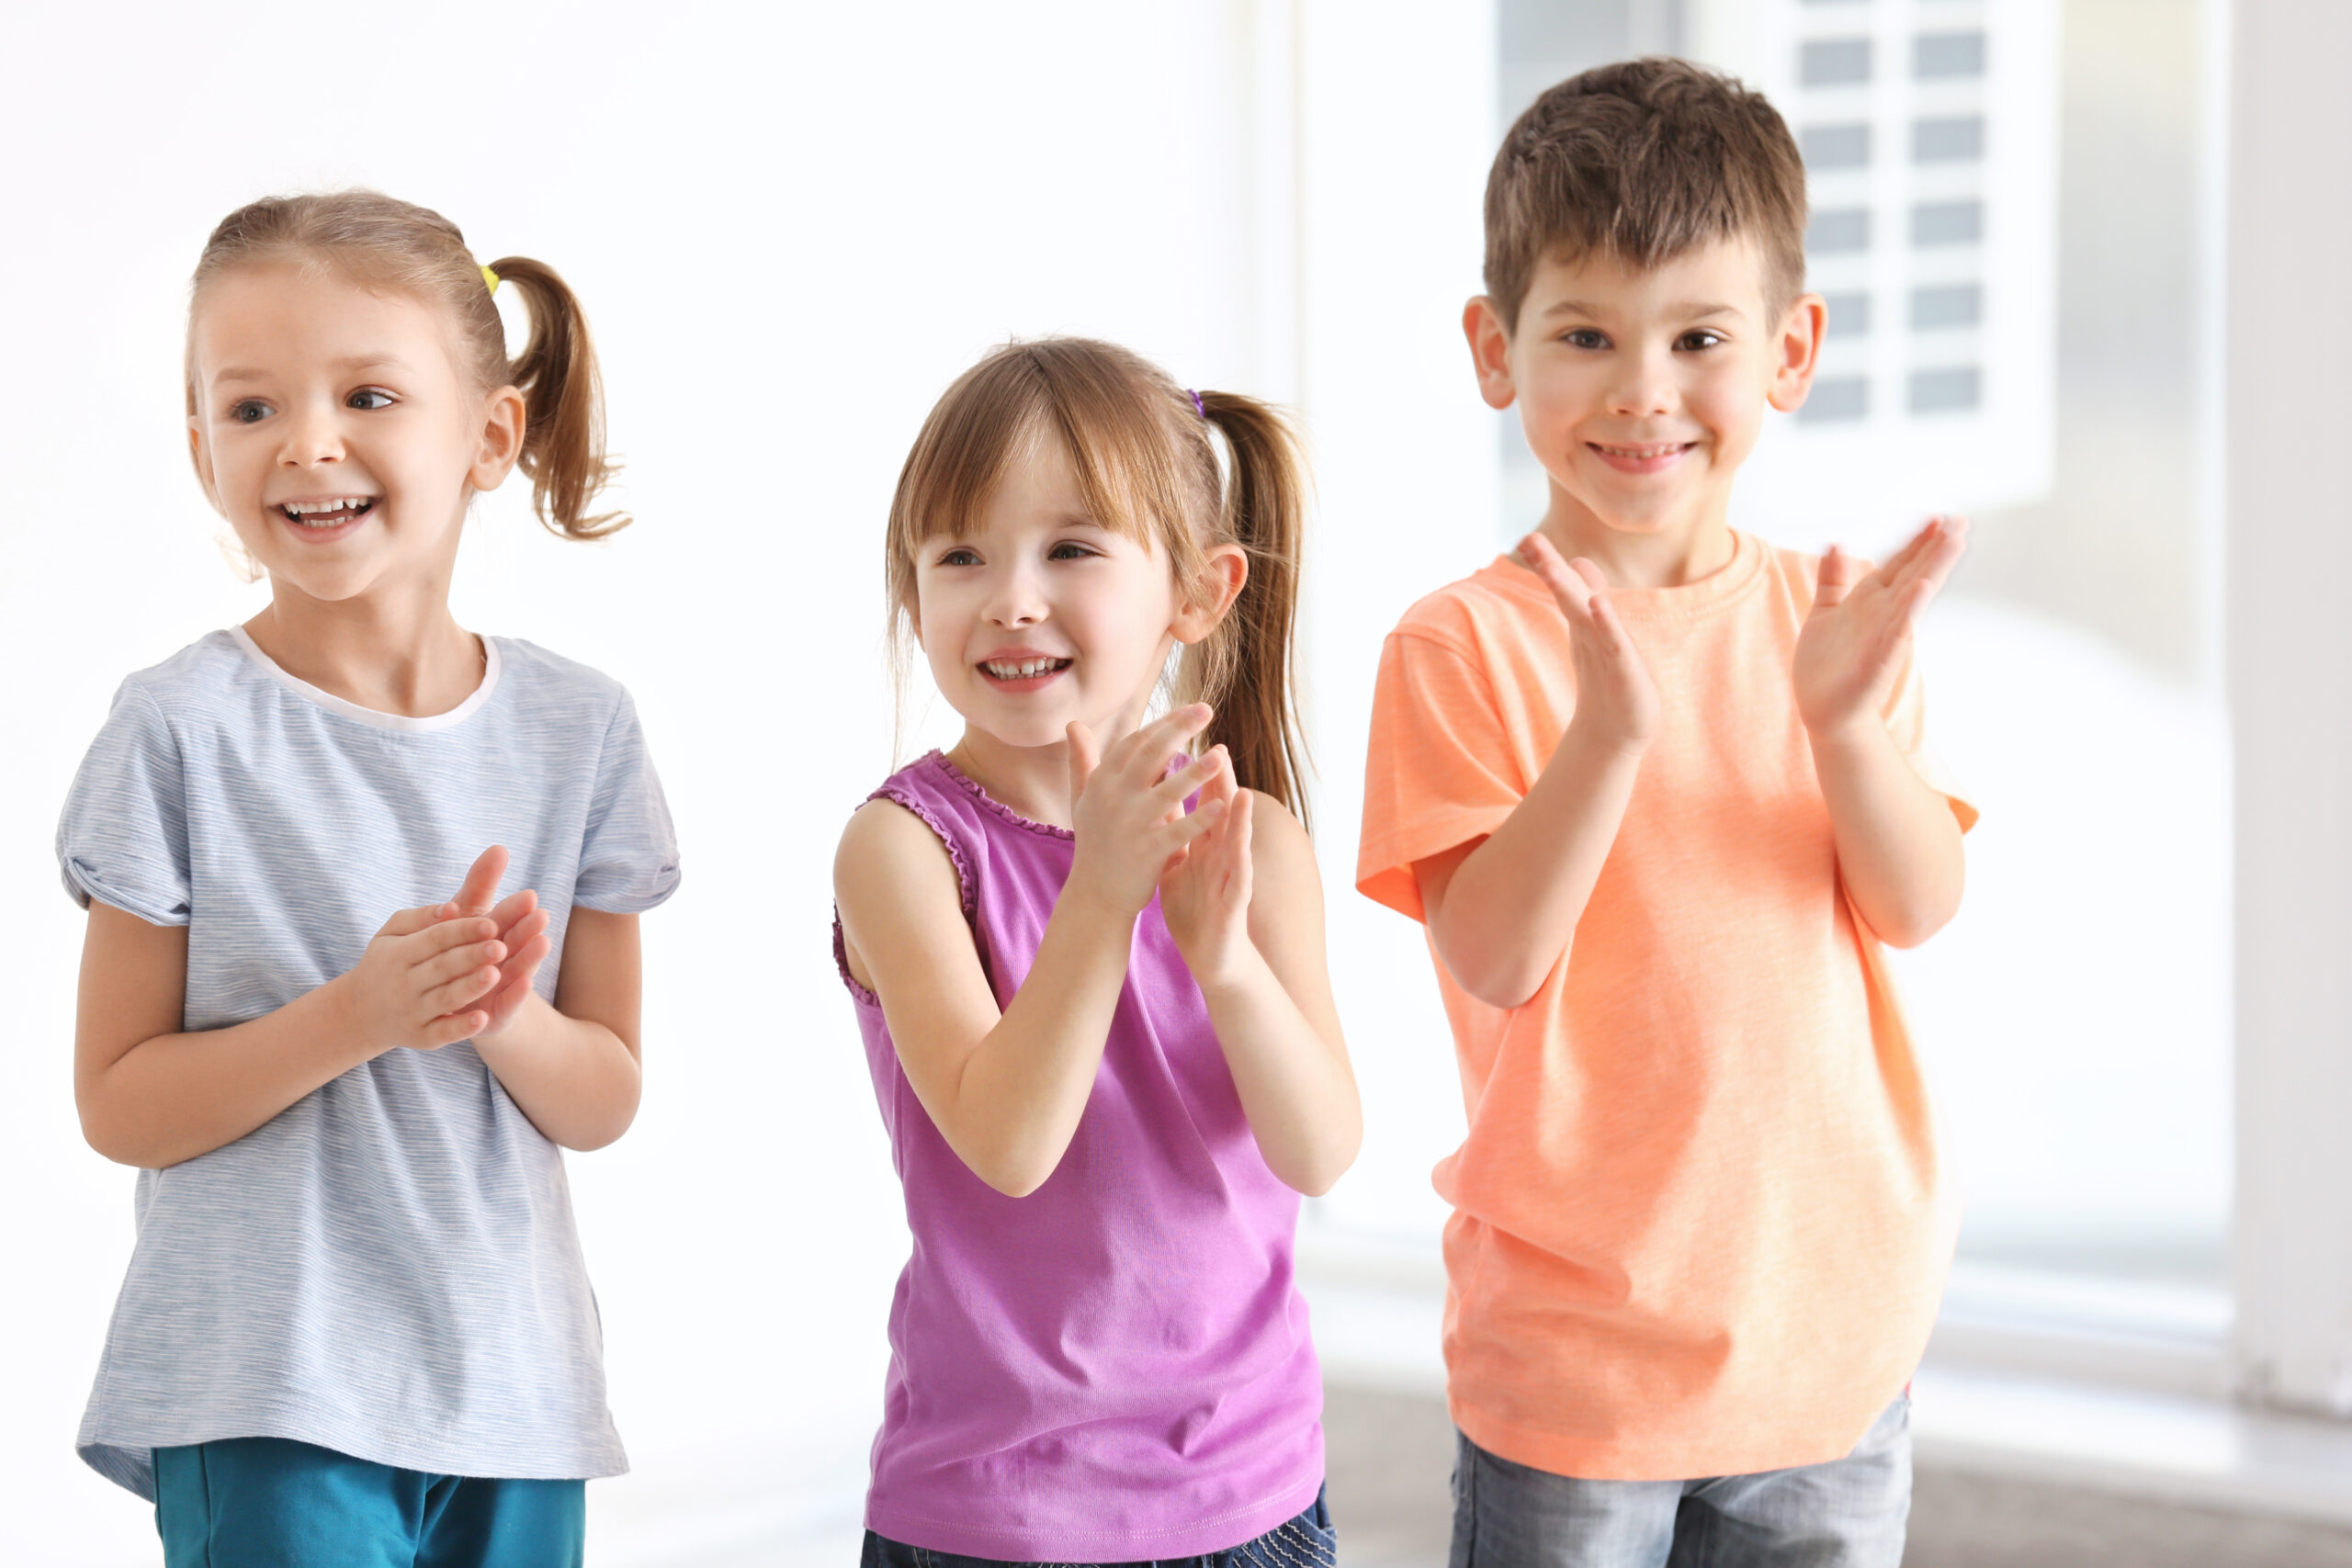 image of 3 kids clapping along to letter b songs.